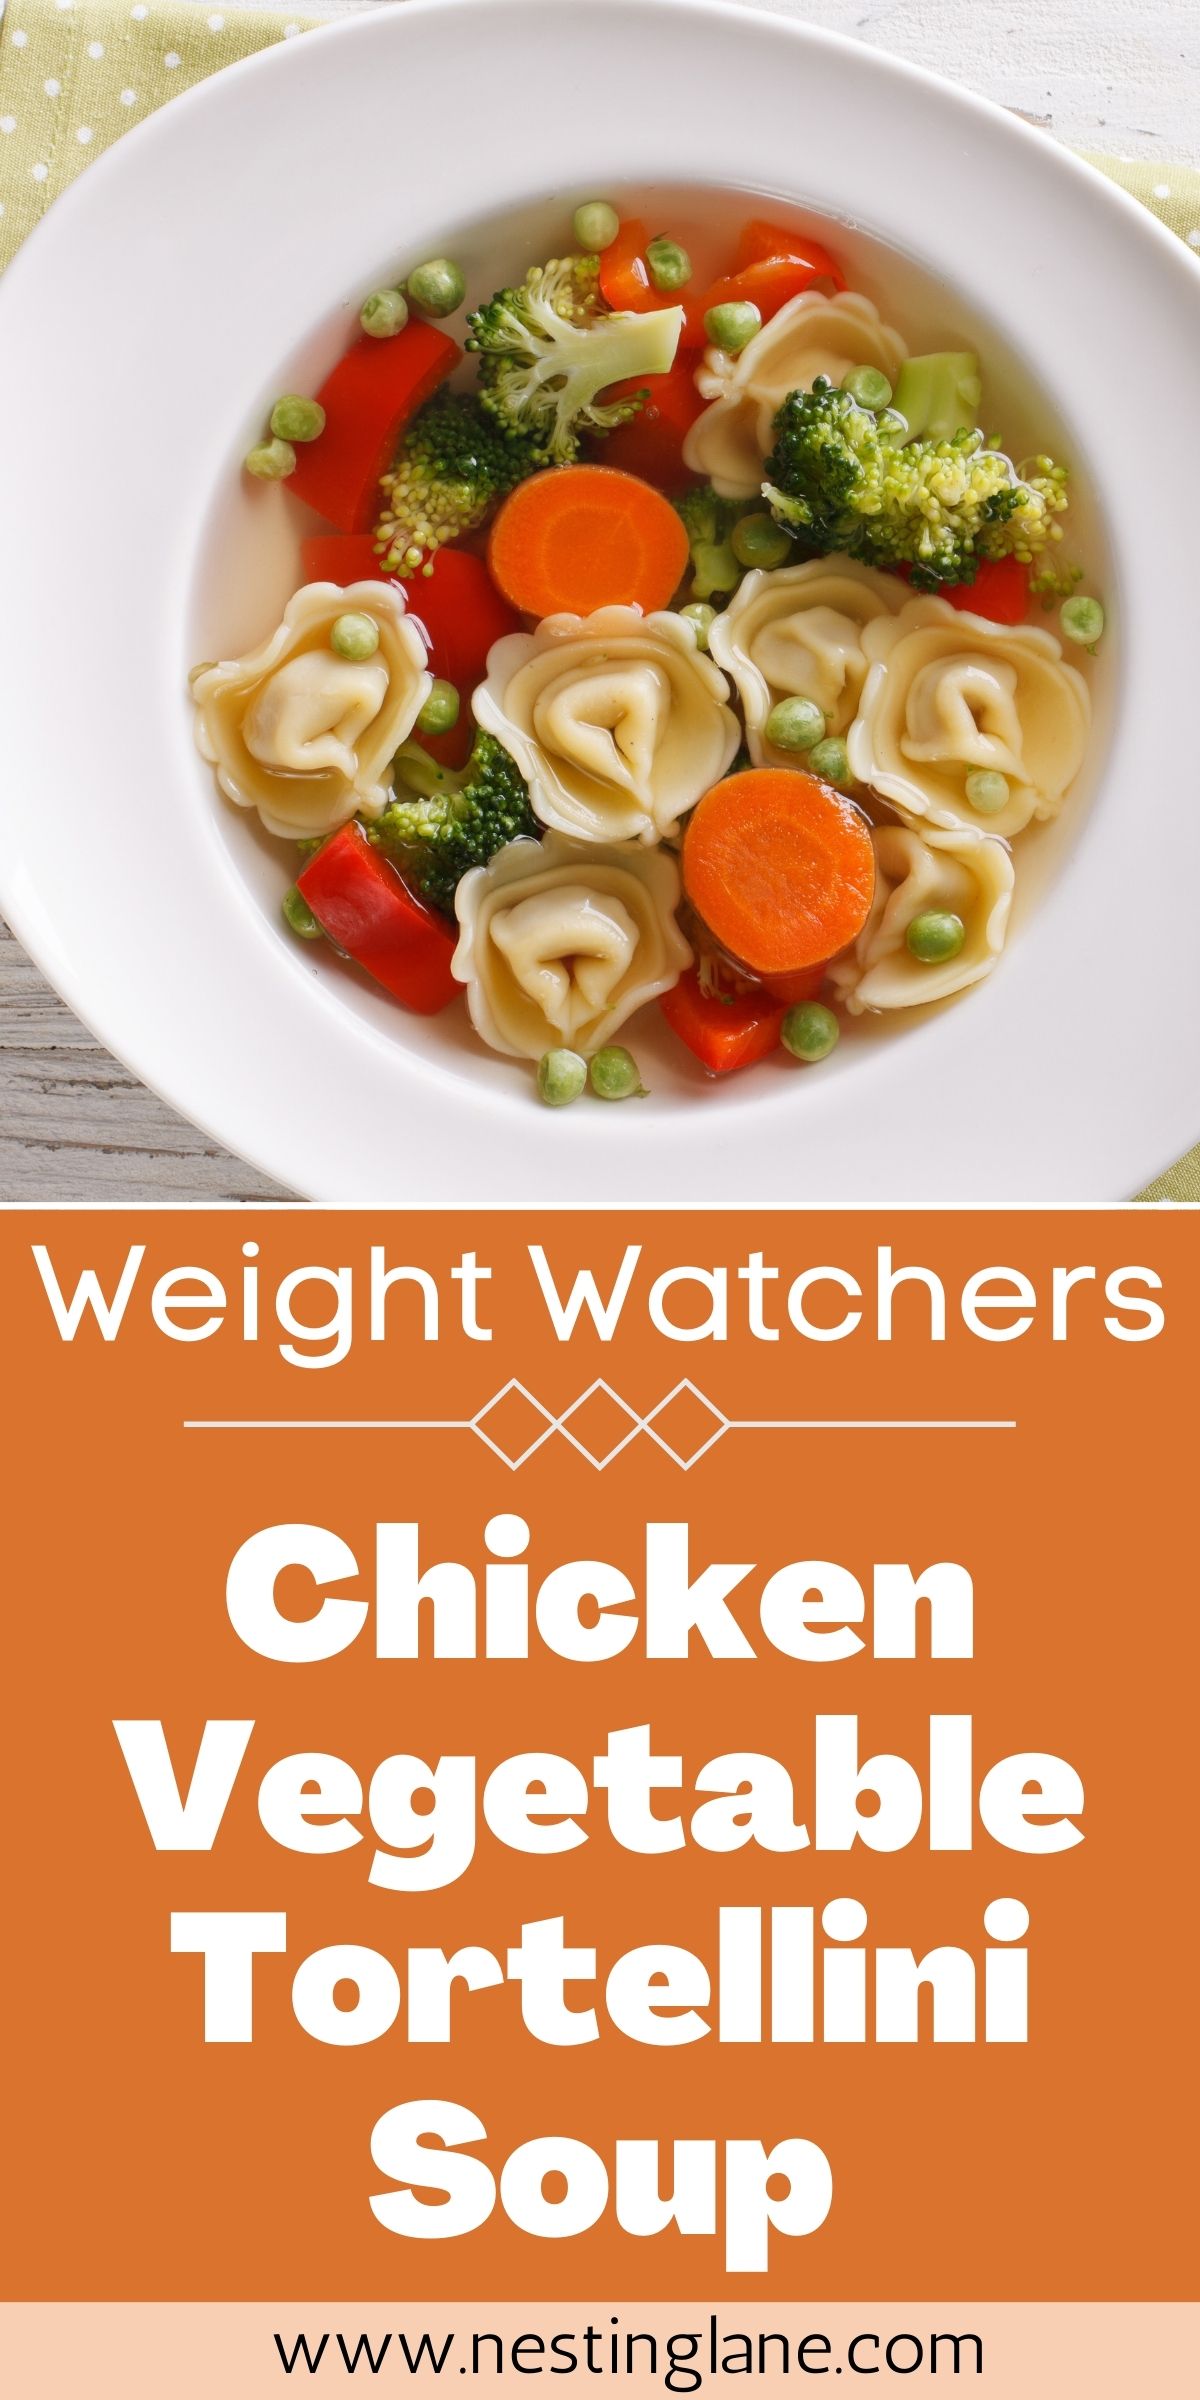 Graphic for Pinterest of Weight Watchers Chicken Vegetable Tortellini Soup Recipe.